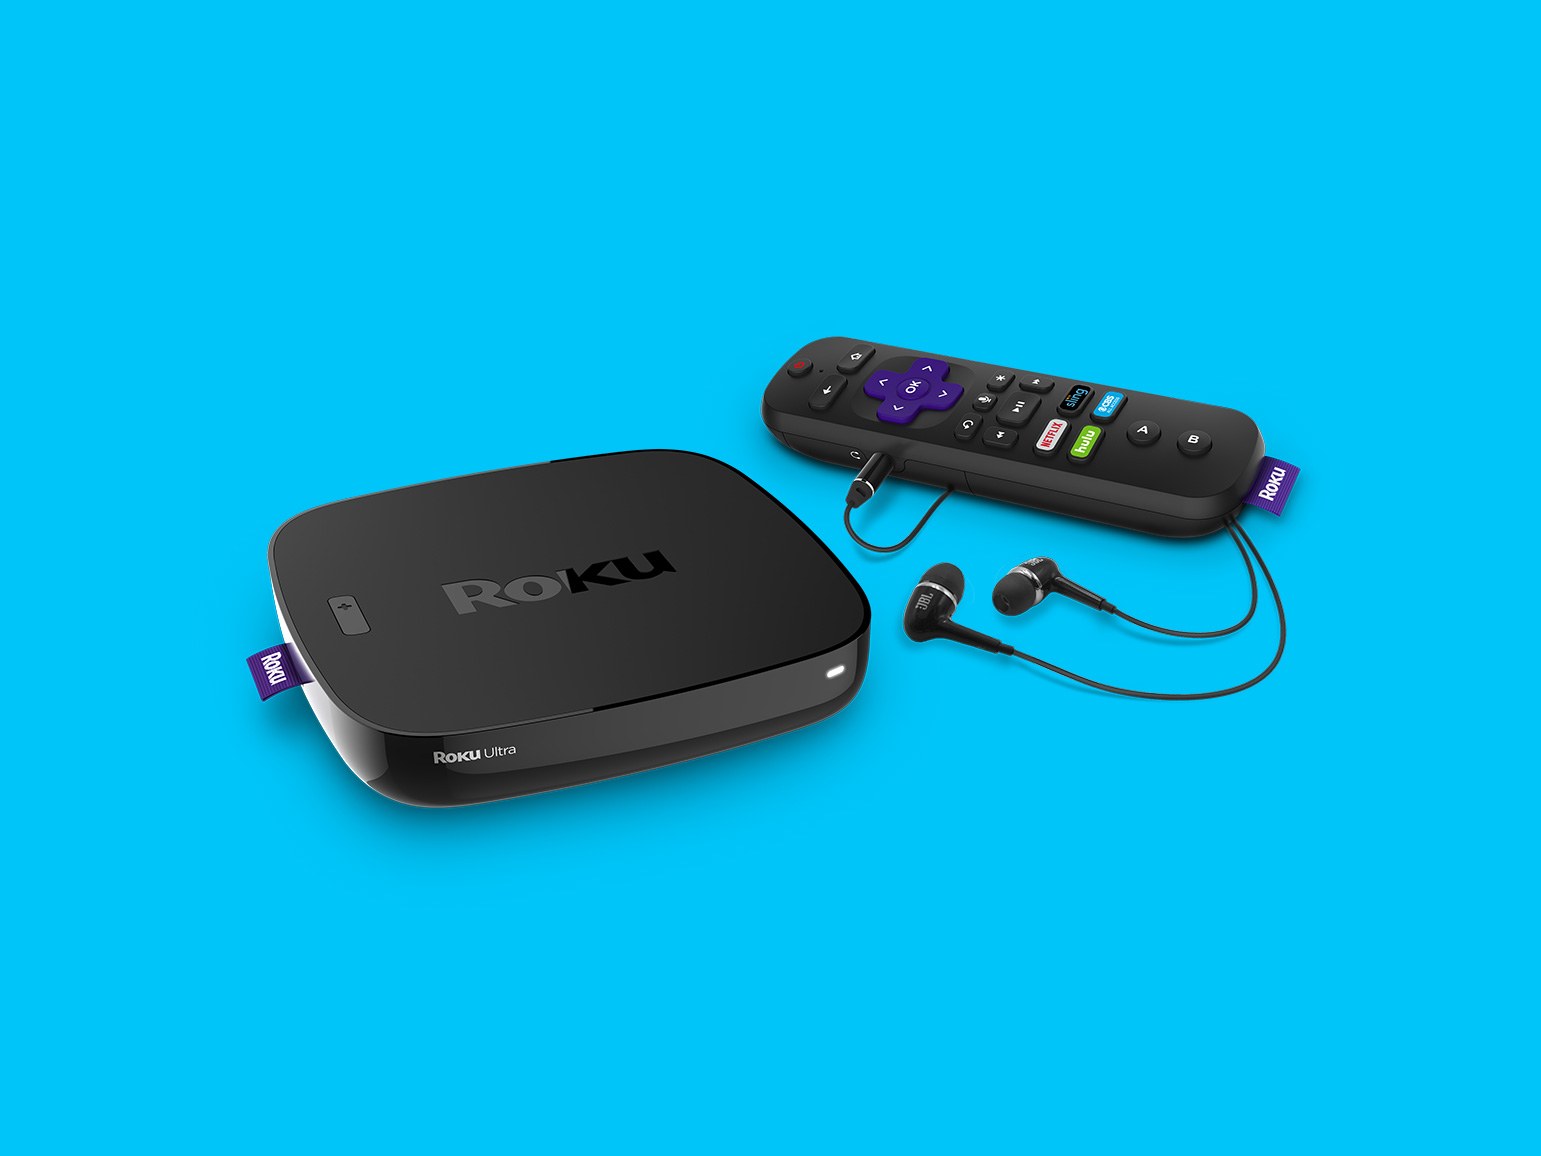 Clear up a difficulty while activating or linking your Roku Device